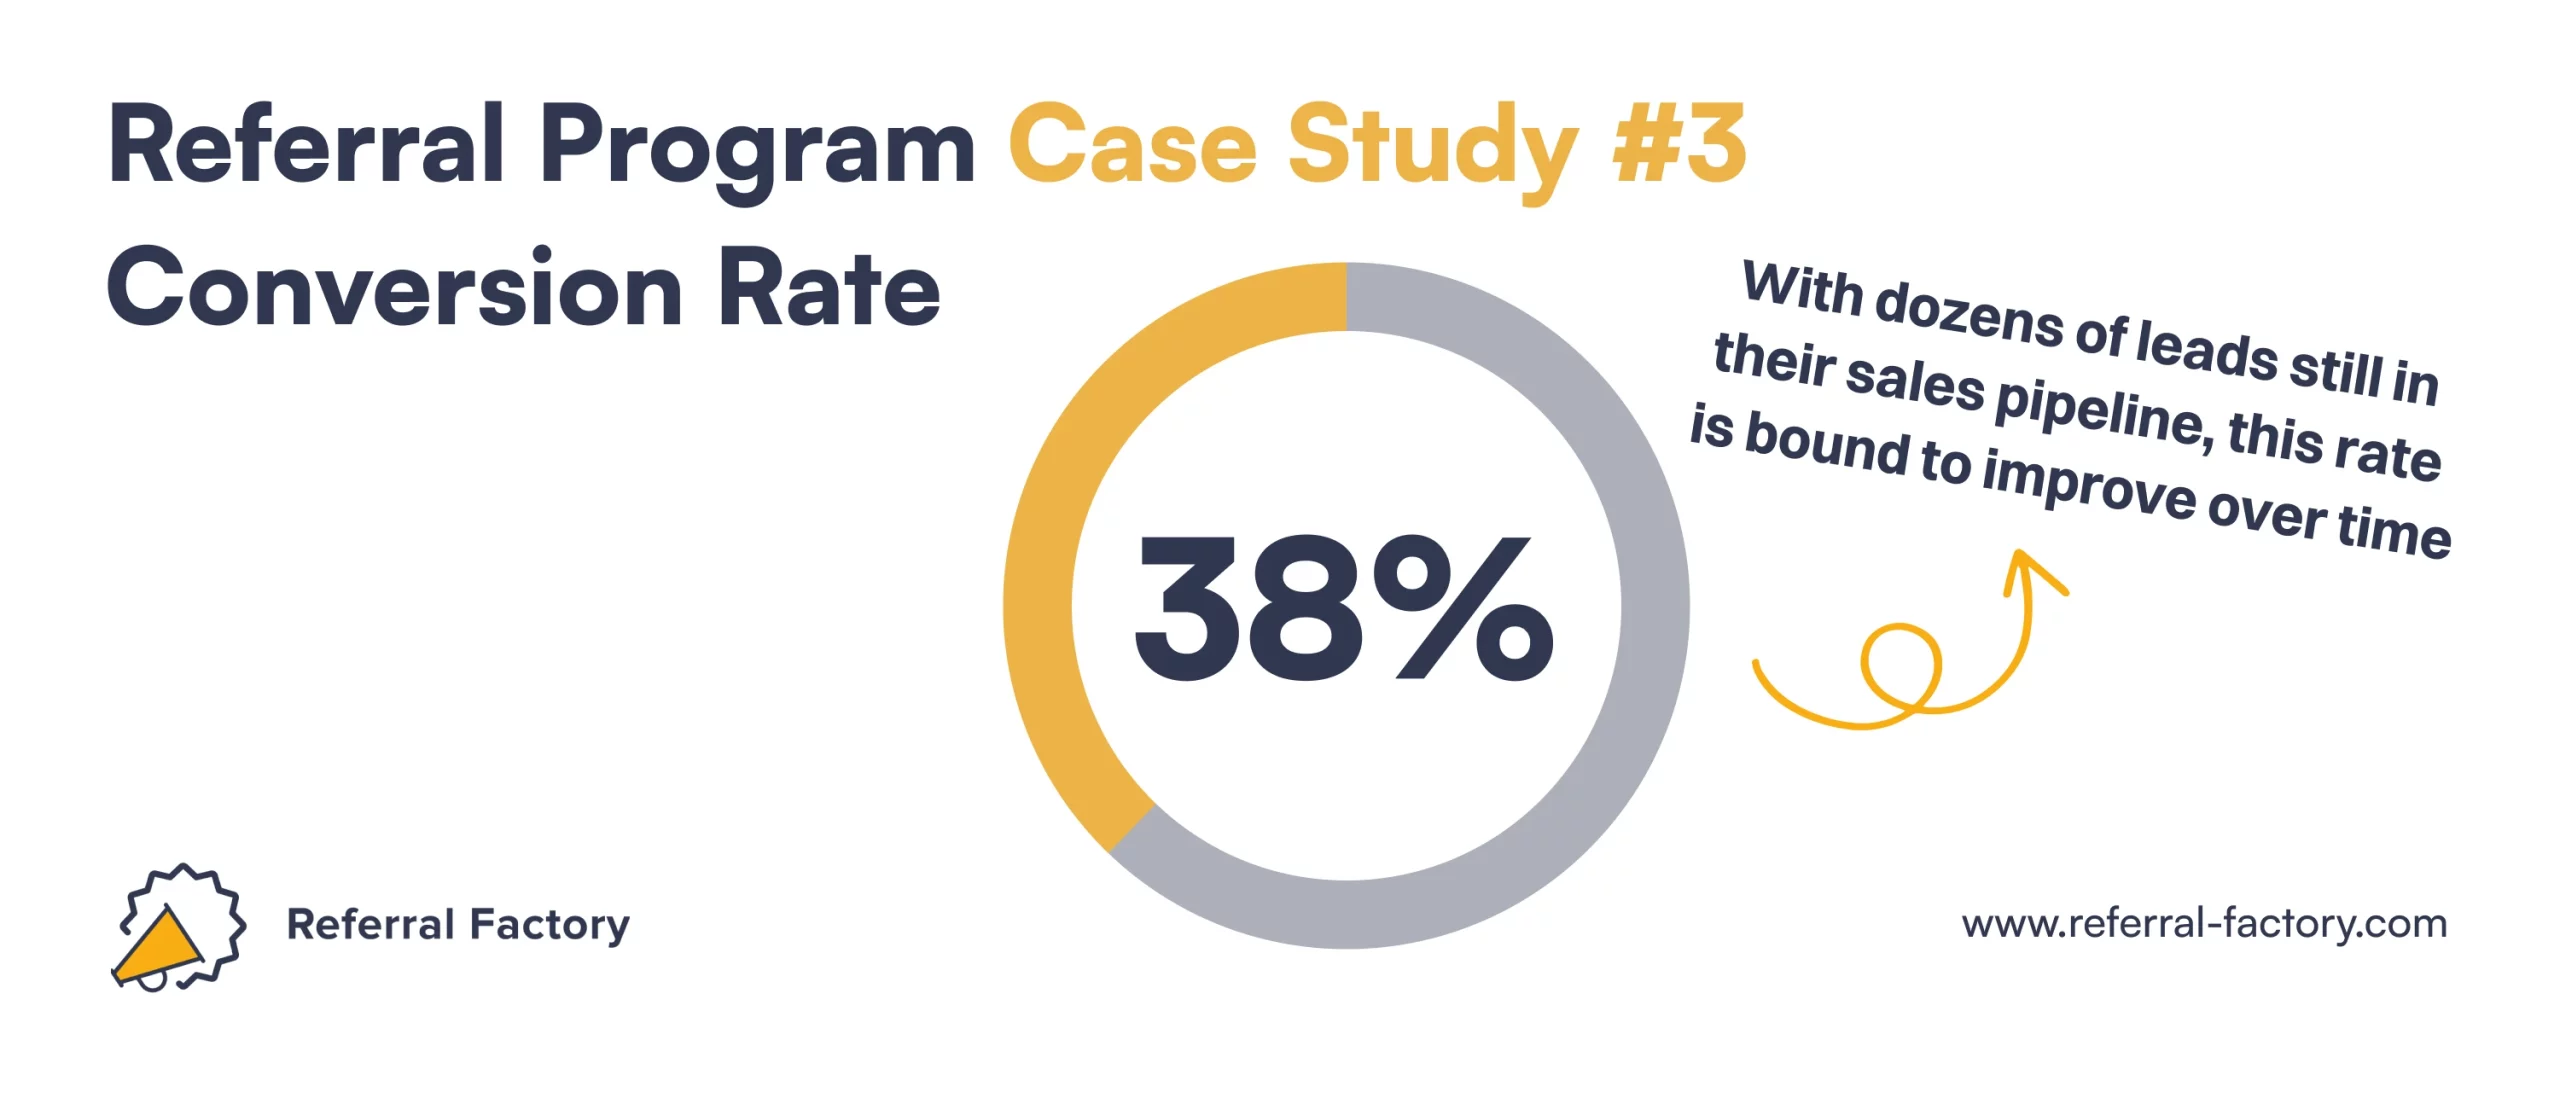 referral program case study solar business conversion rate referral factory